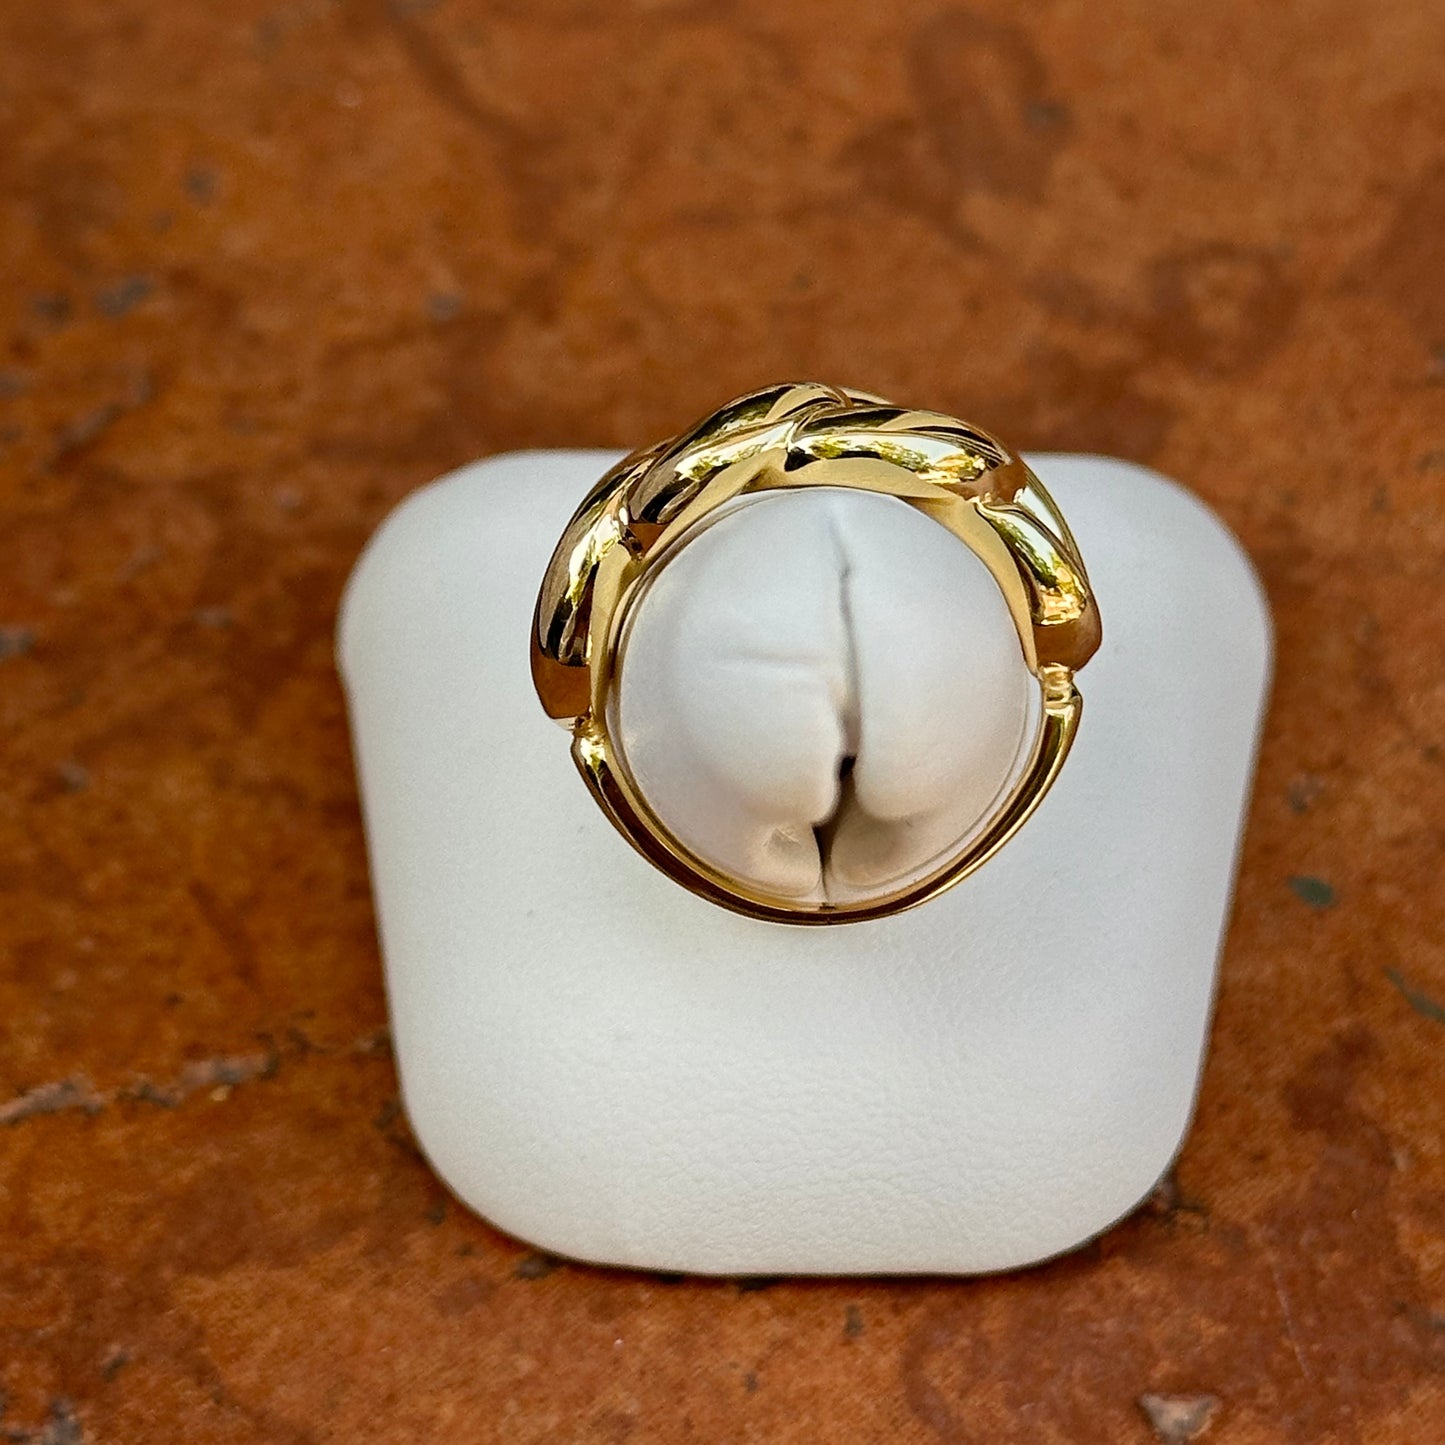 14KT Yellow Gold Chain Link Design Ring